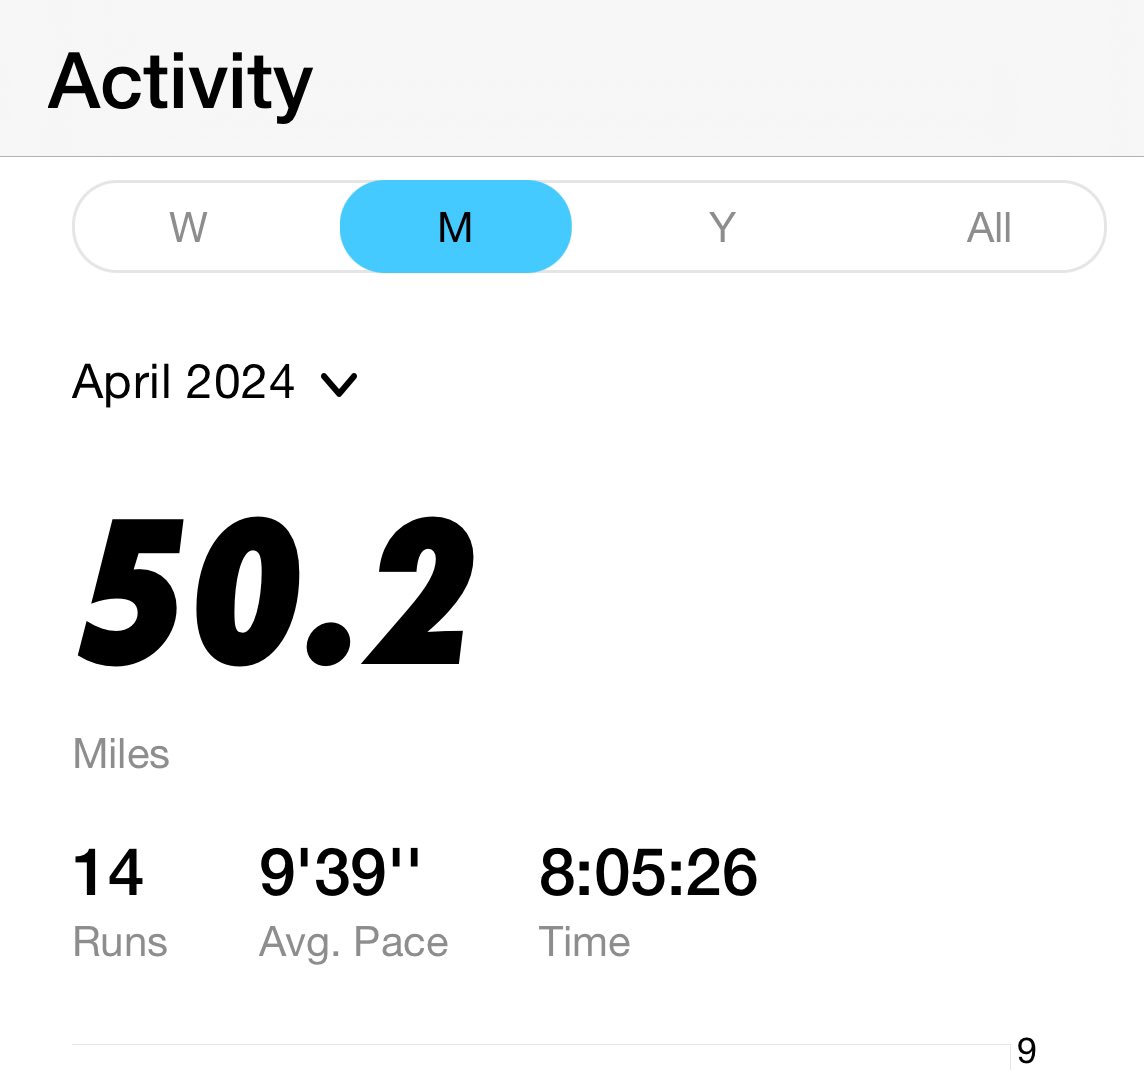 Sometimes you have to celebrate the wins! As I’m getting back into race-shape I set a goal of 50 miles for April.  And I did it 😎 #everyrunhasapurpose  #sexypace